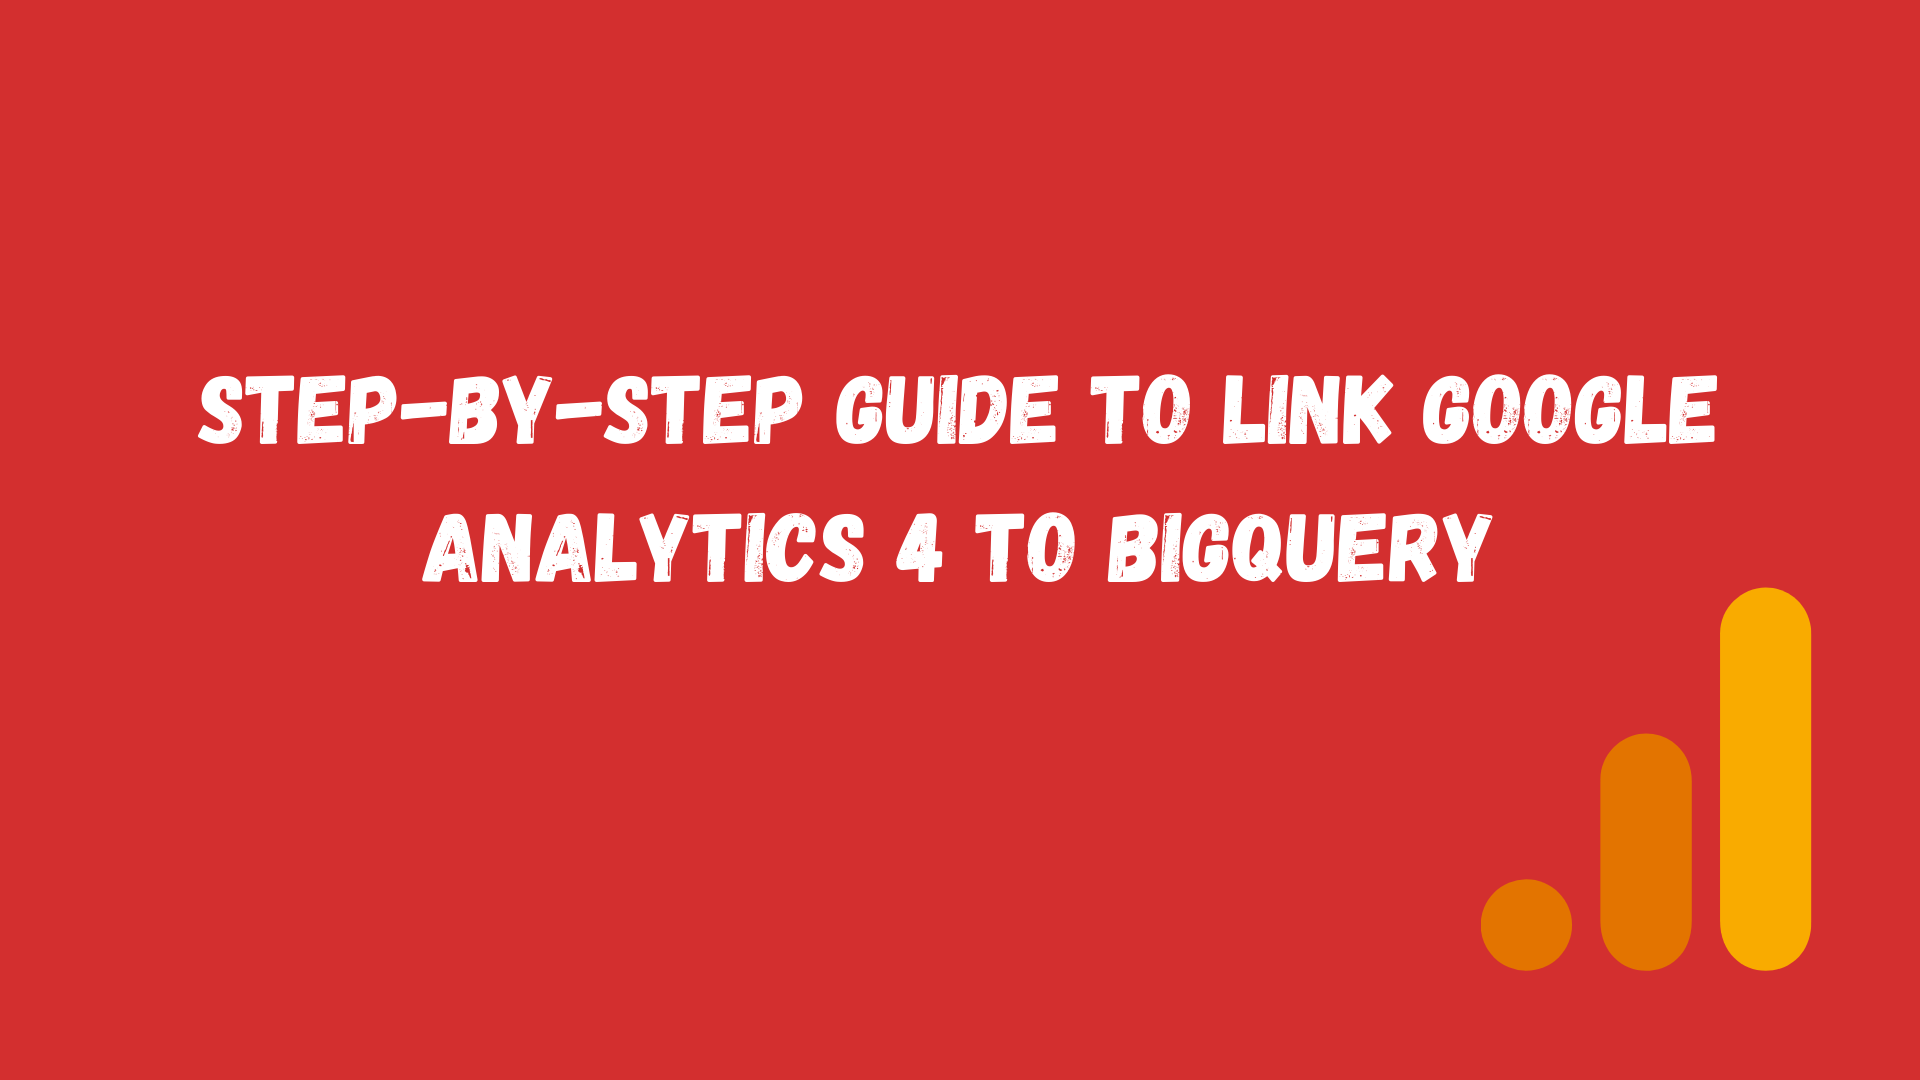 How to link Google Analytics 4 to BigQuery? The ultimate guide.